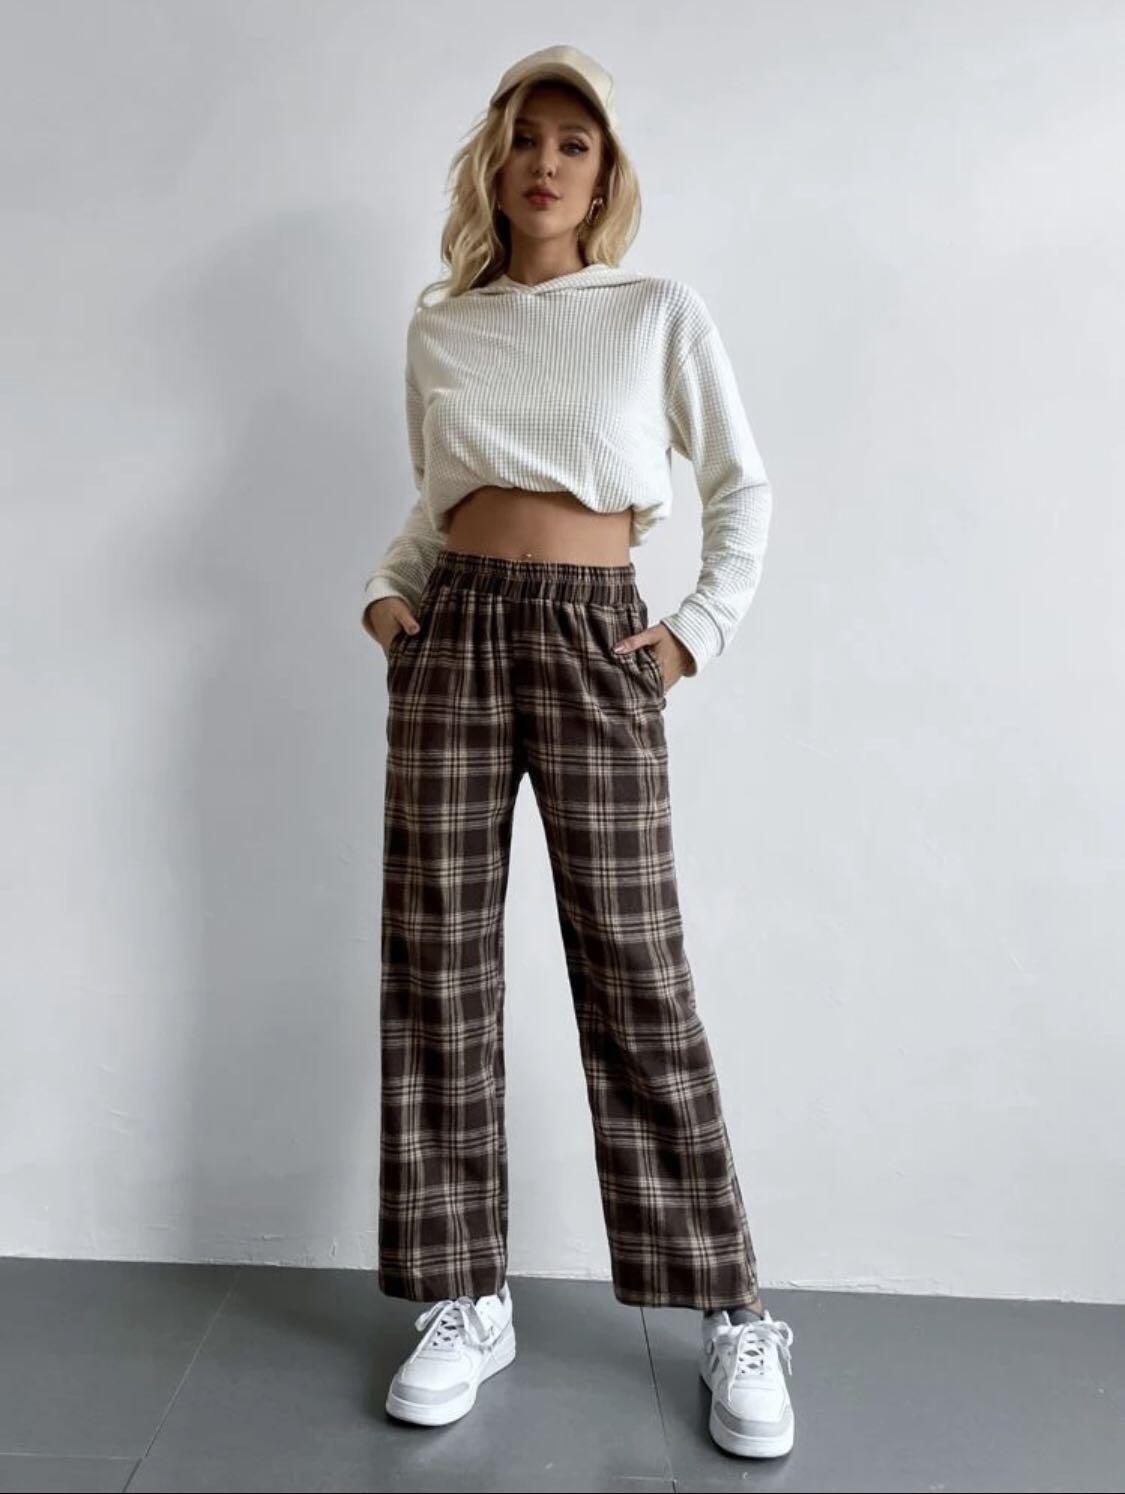 SHEIN Clasi Women's Plaid Suit Pants With Pockets | SHEIN USA